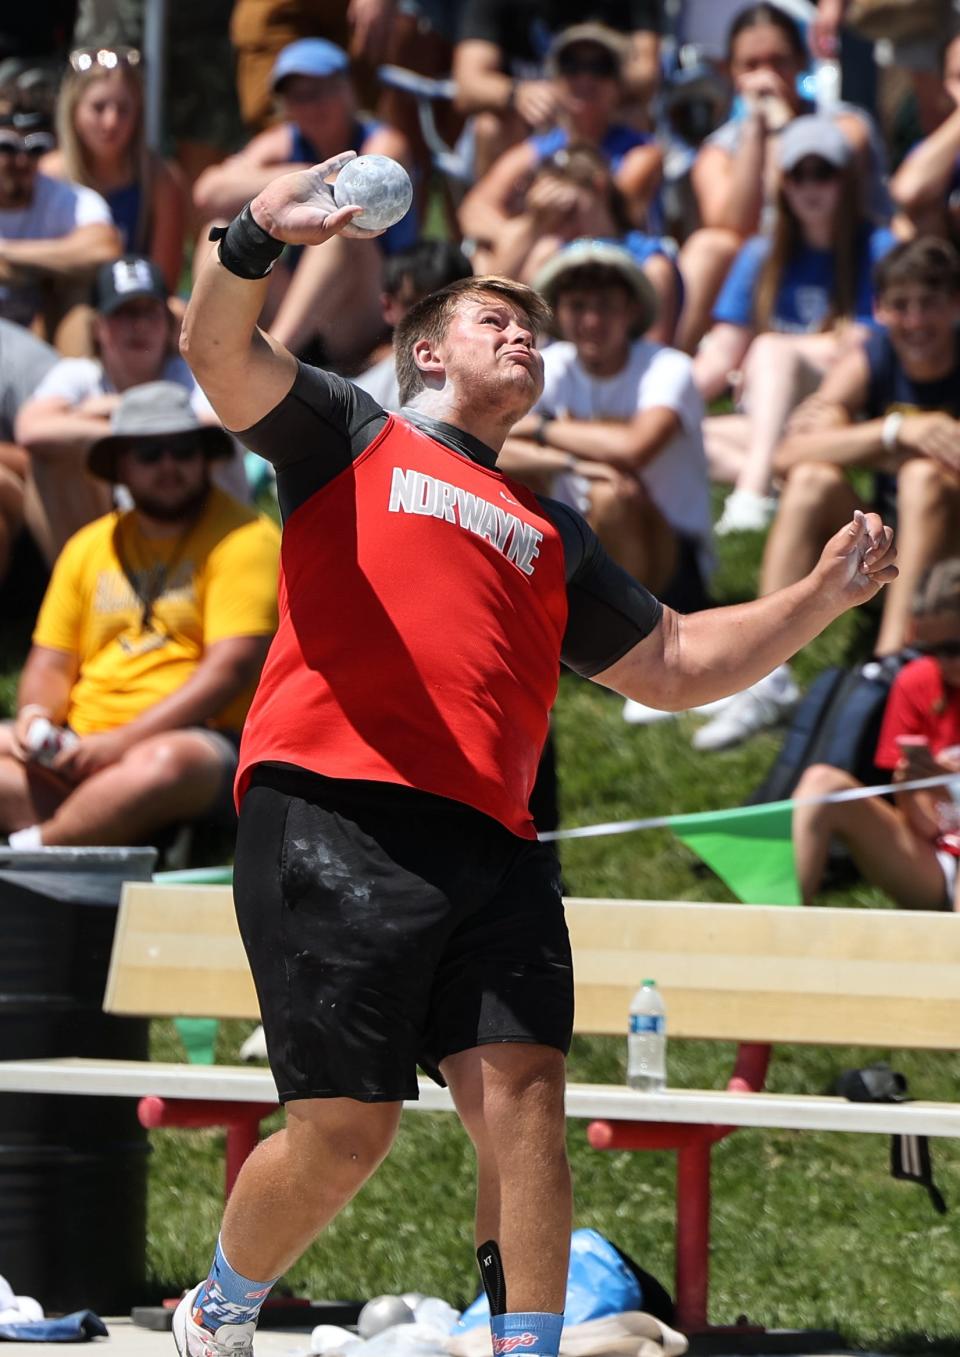 Norwayne senior Colby Morlock broke Smithville's Larry Kolic's shot put record of 64'9" set in 1981, with a throw of 64'11" to finish second in the shot put.